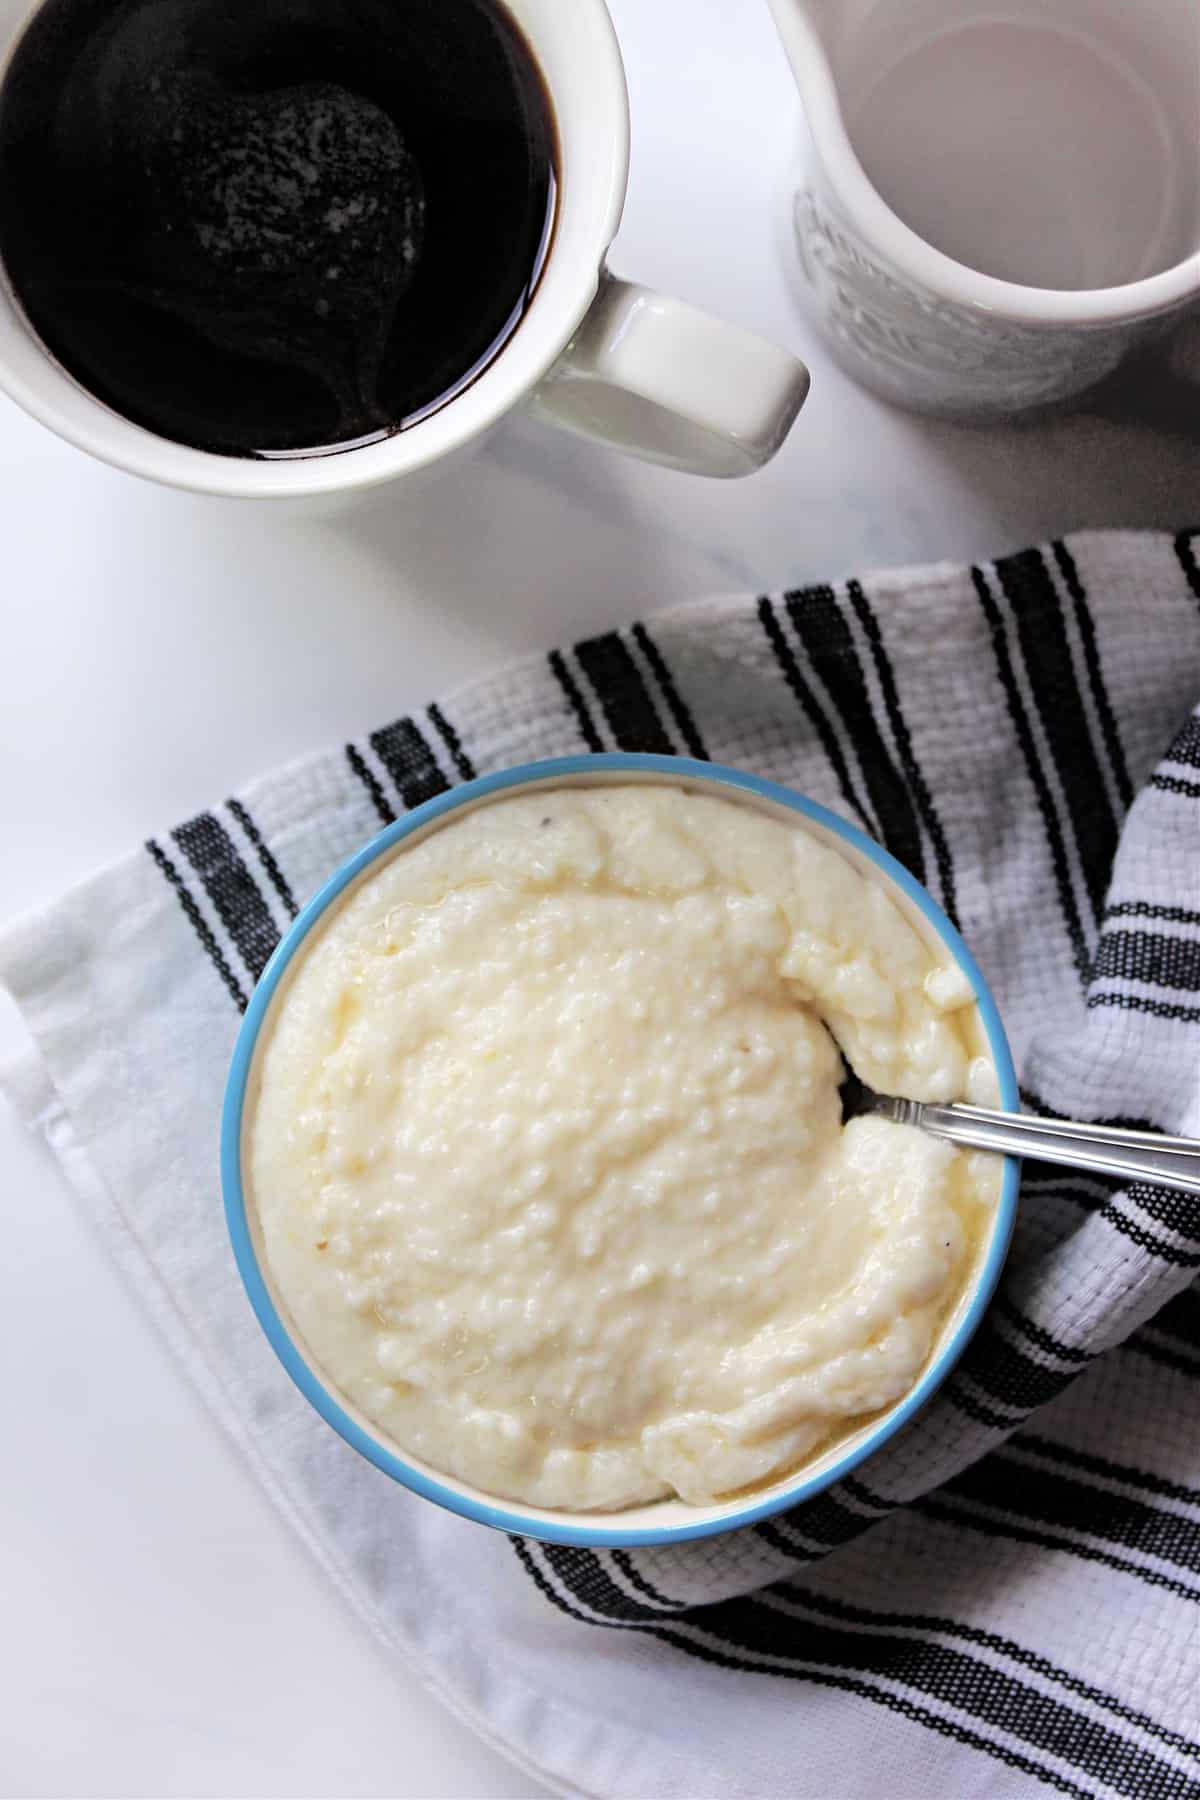 Bowl of cheese grits with a spoon on a black and white striped tea towel next to a cup of coffee..